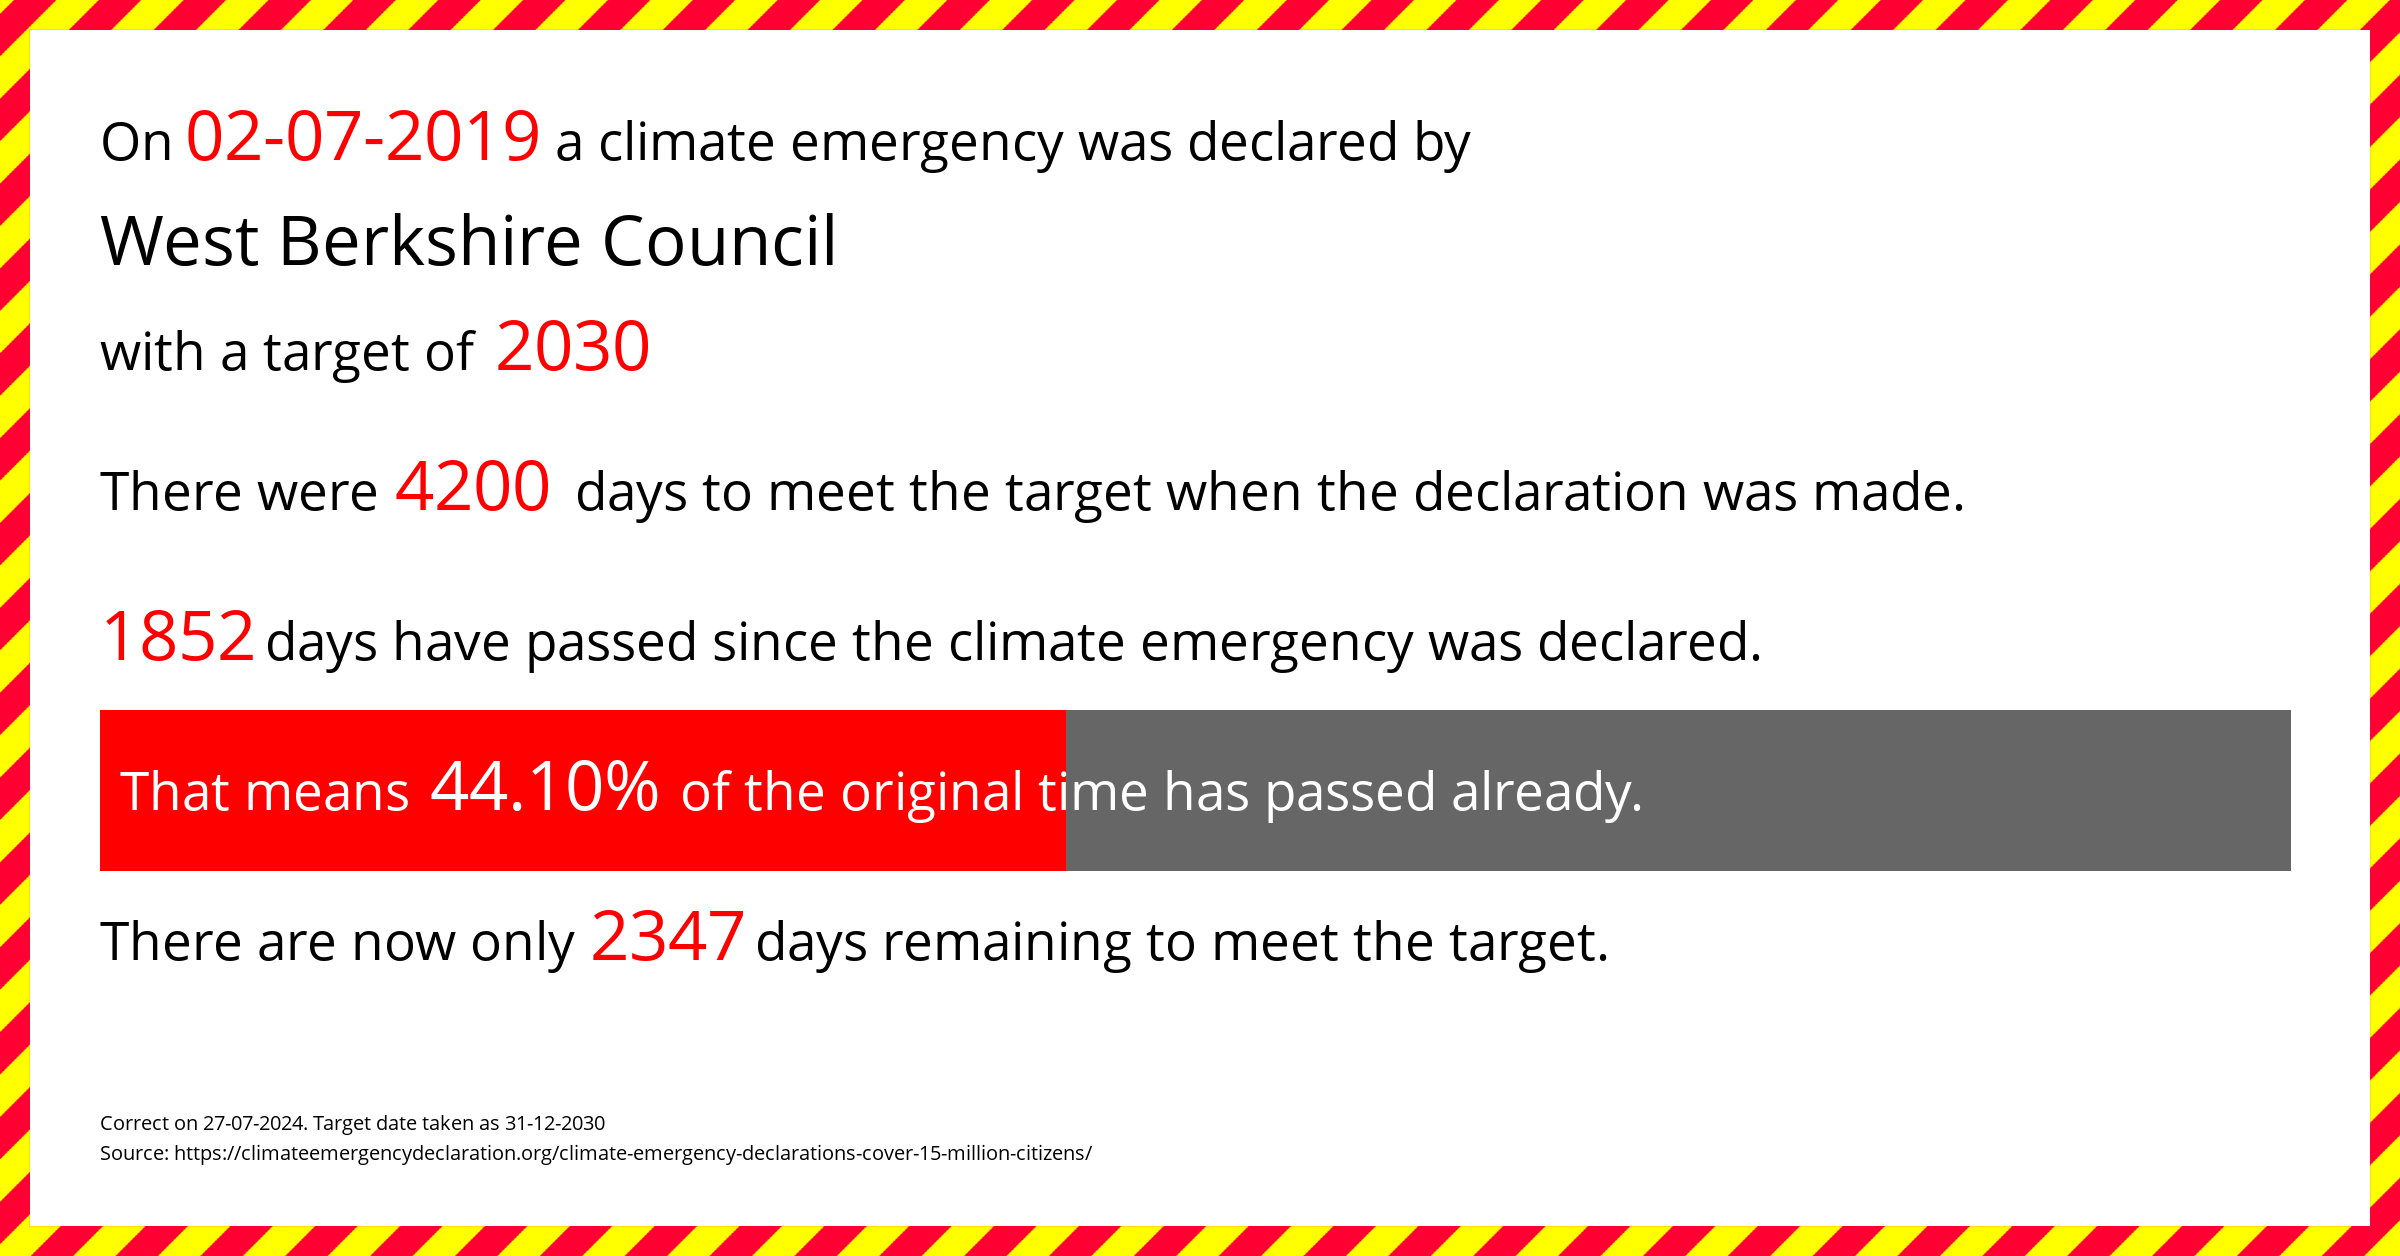 West Berkshire Council declared a Climate emergency on Tuesday 2nd July 2019, with a target of 2030.